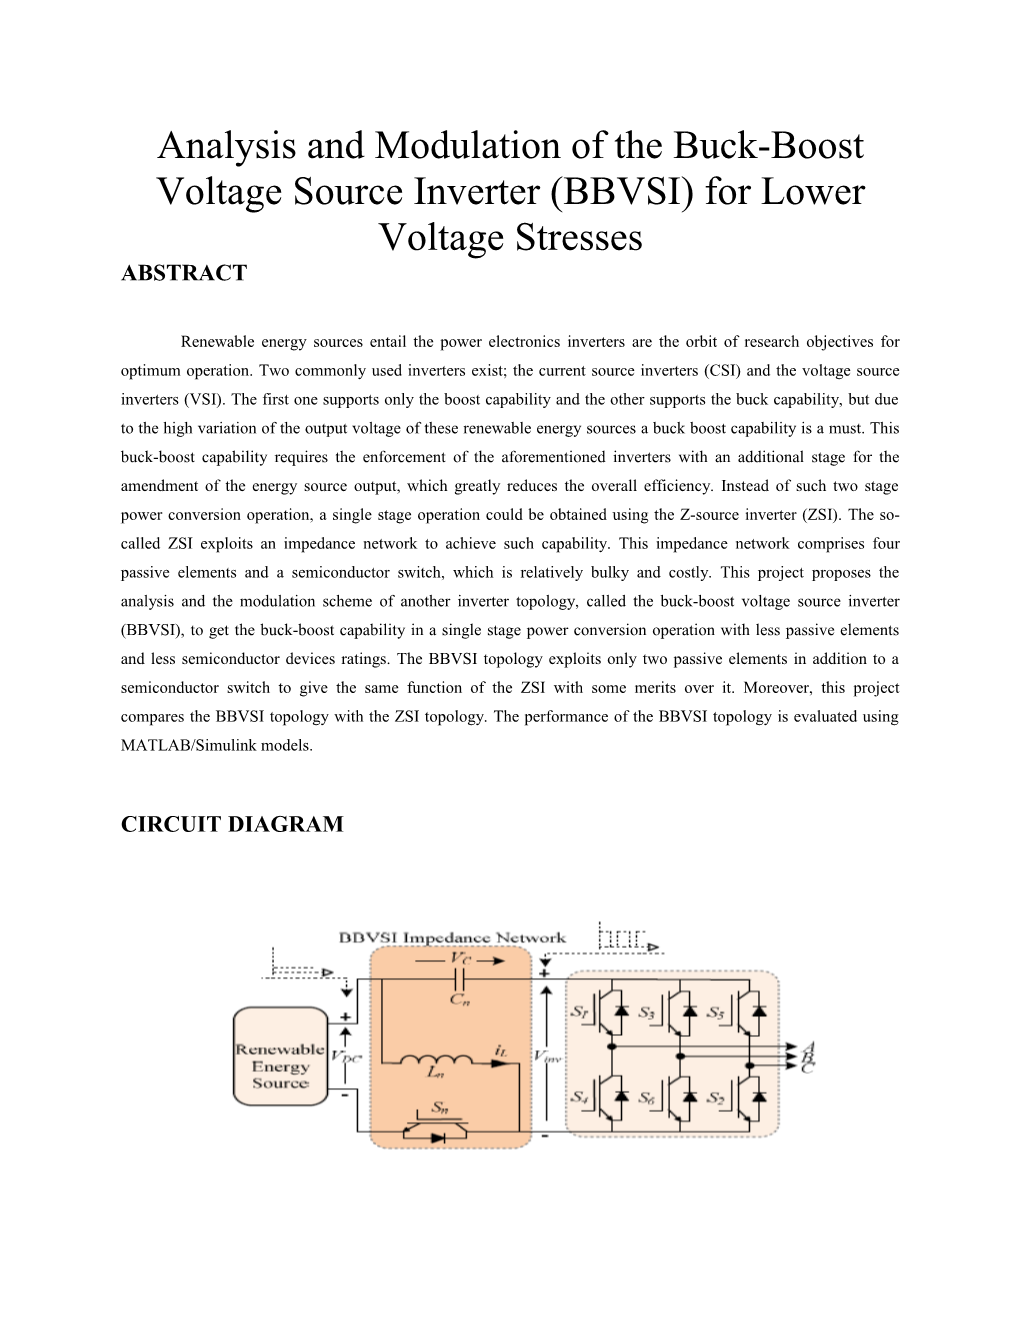 Analysis and Modulation of the Buck-Boost Voltage Source Inverter (BBVSI) for Lower Voltage